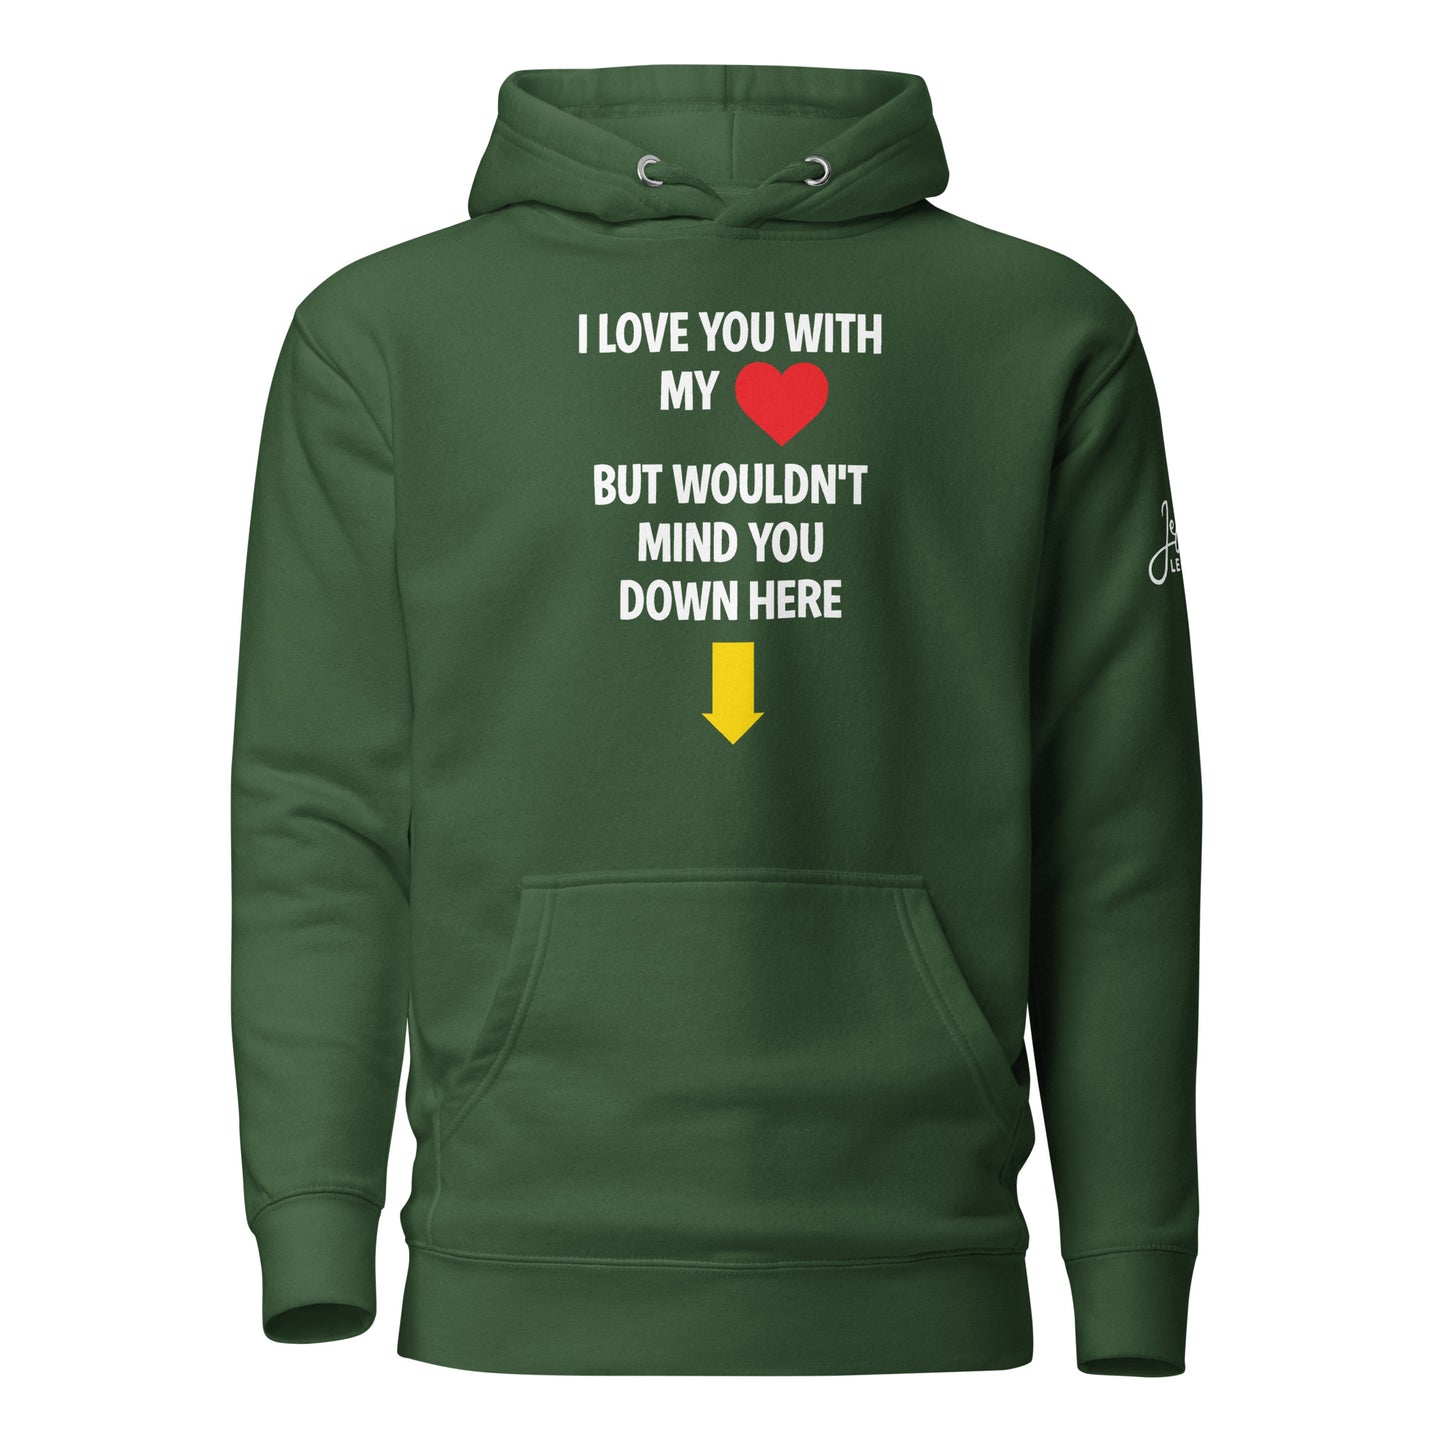 I Love You With My Heart Hoodie